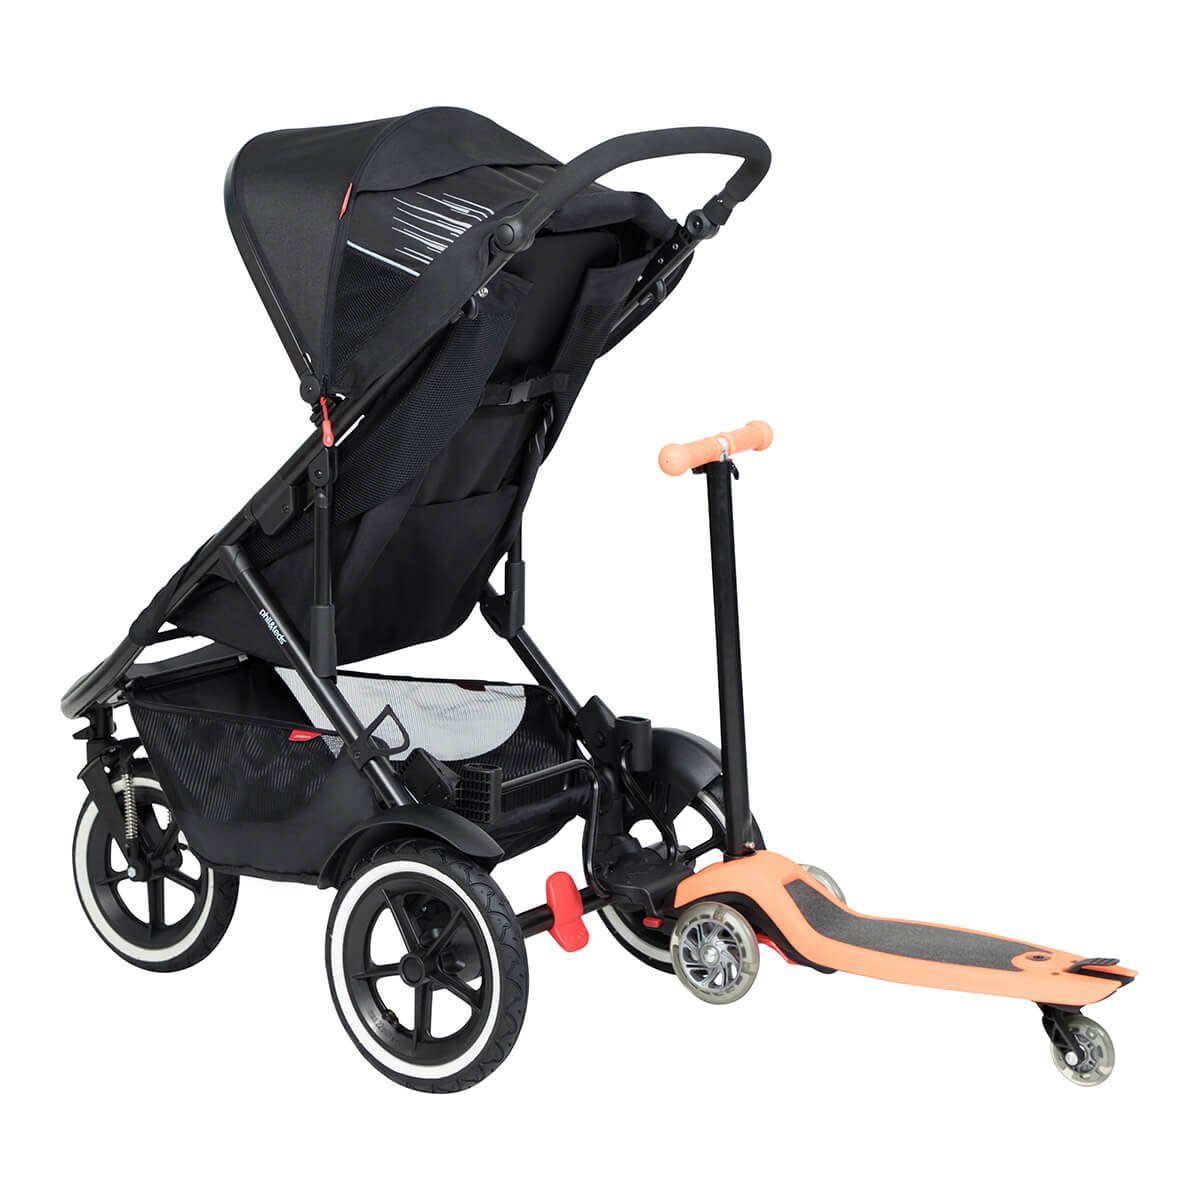 https://cdn.accentuate.io/4546157183081/19119322824809/philteds-sport-buggy-with-freerider-stroller-board-in-rear-v1626484892772.jpg?1200x1200